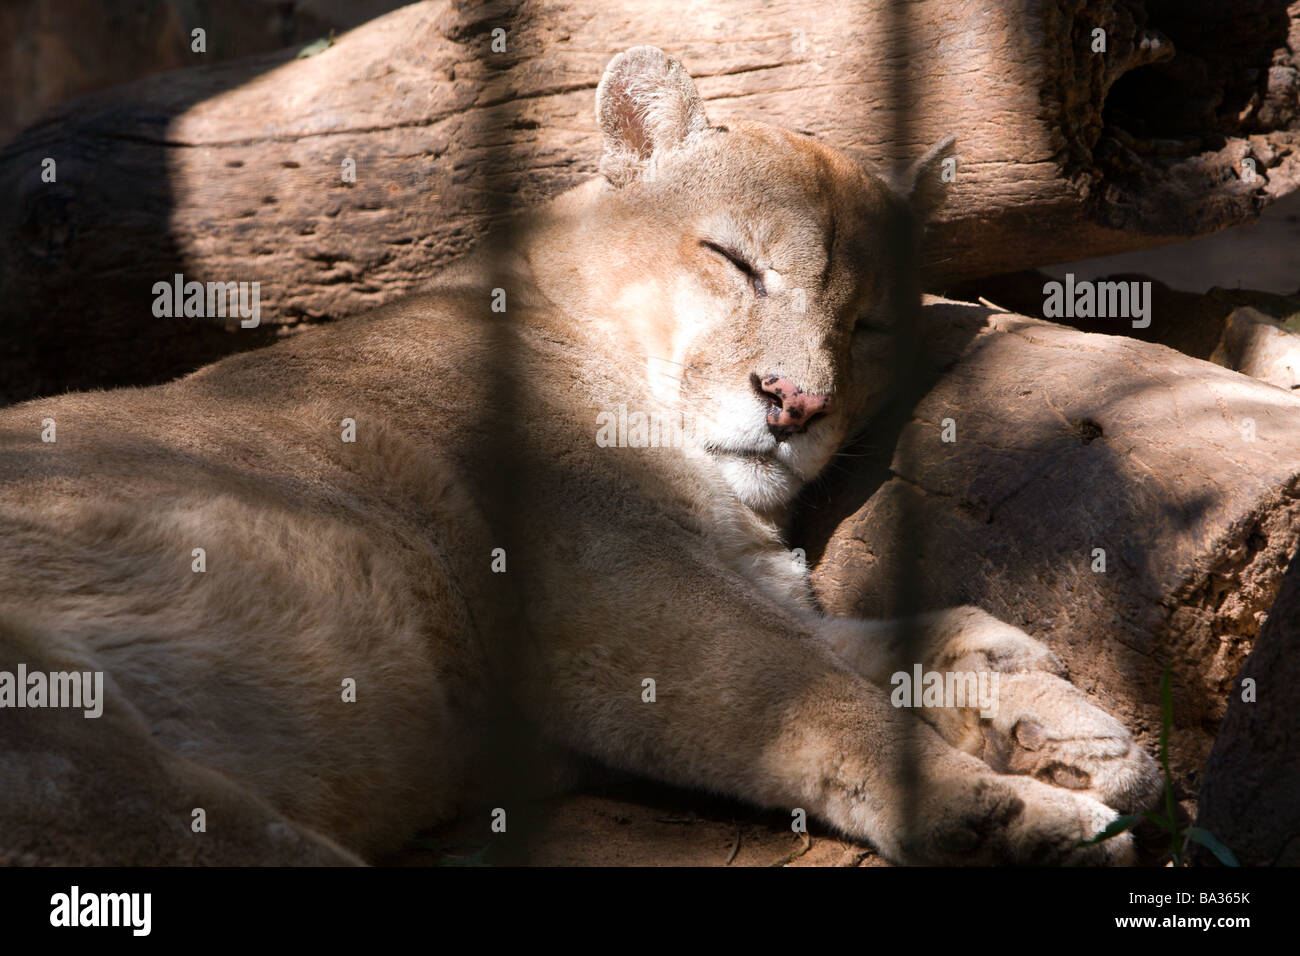 Cougar (Puma concolor), a.k.a. puma, mountain lion, panther or catamount sleeps inside its enclosure at Zoo of Asuncion, Paraguay Stock Photo